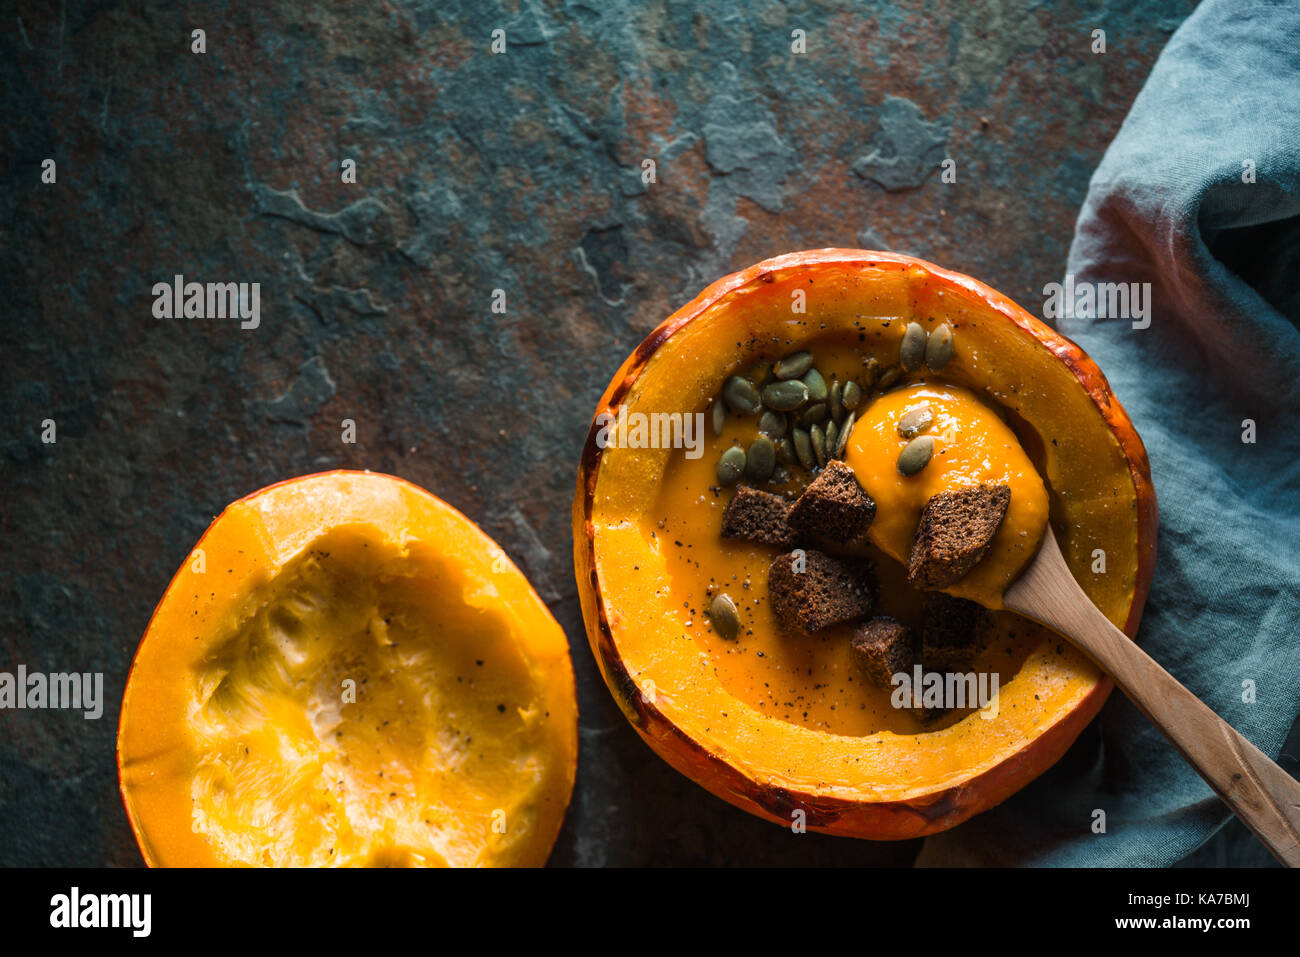 Spoon in pumpkin with soup, sunflower seeds and croutons horizontal Stock Photo